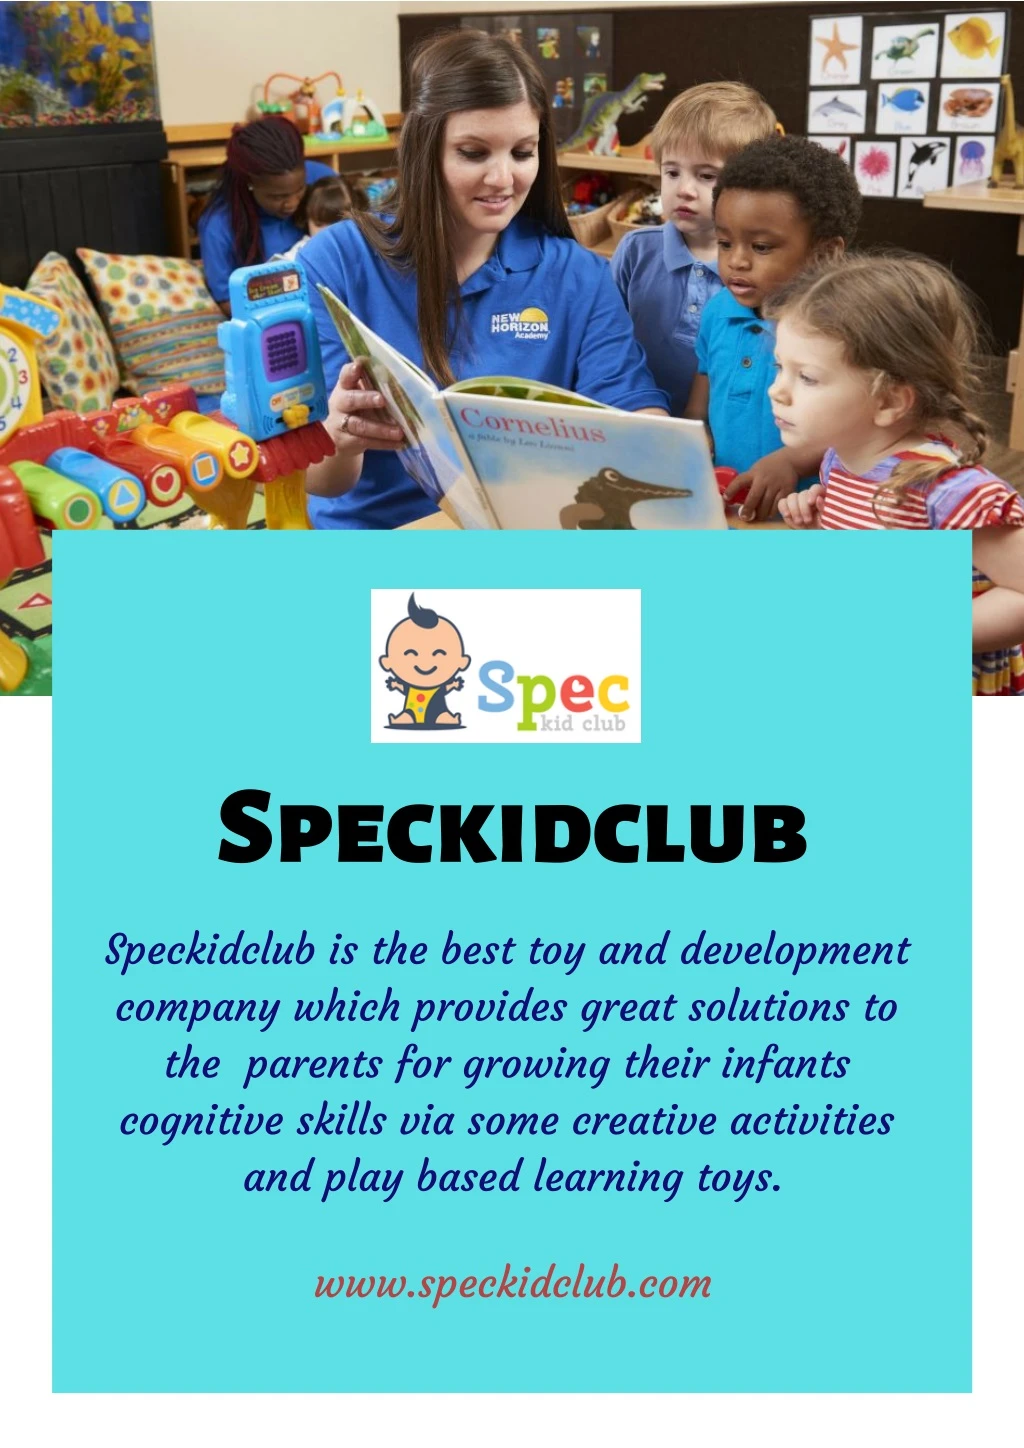 speckidclub